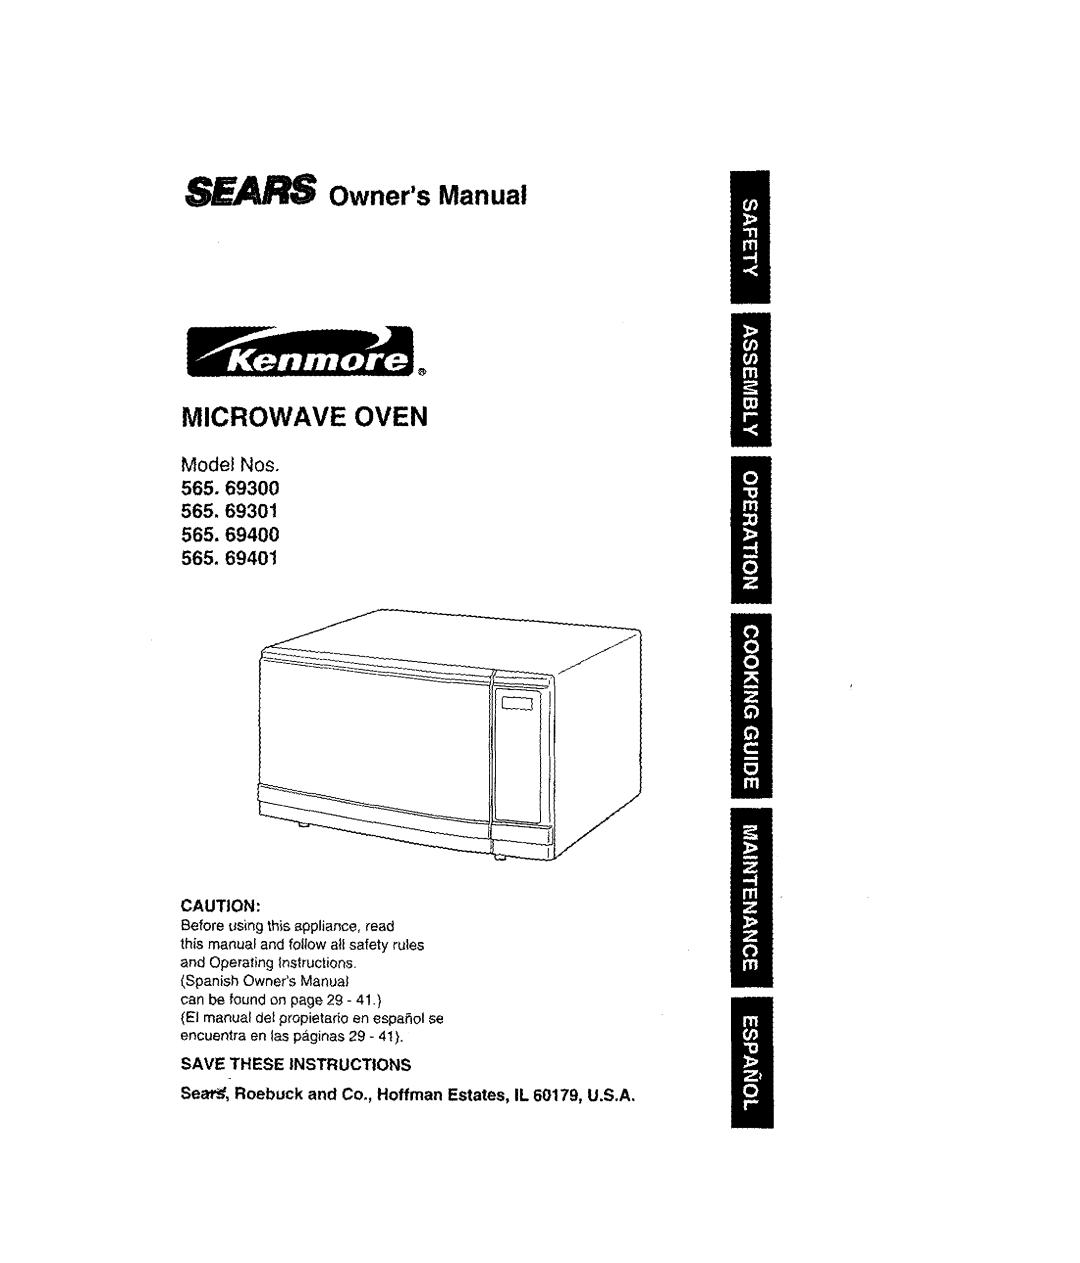 Sears 565.69301, 565.69401 owner manual SE I OwnersManual, Microwave Oven, Model Nos, Save These Instructions 